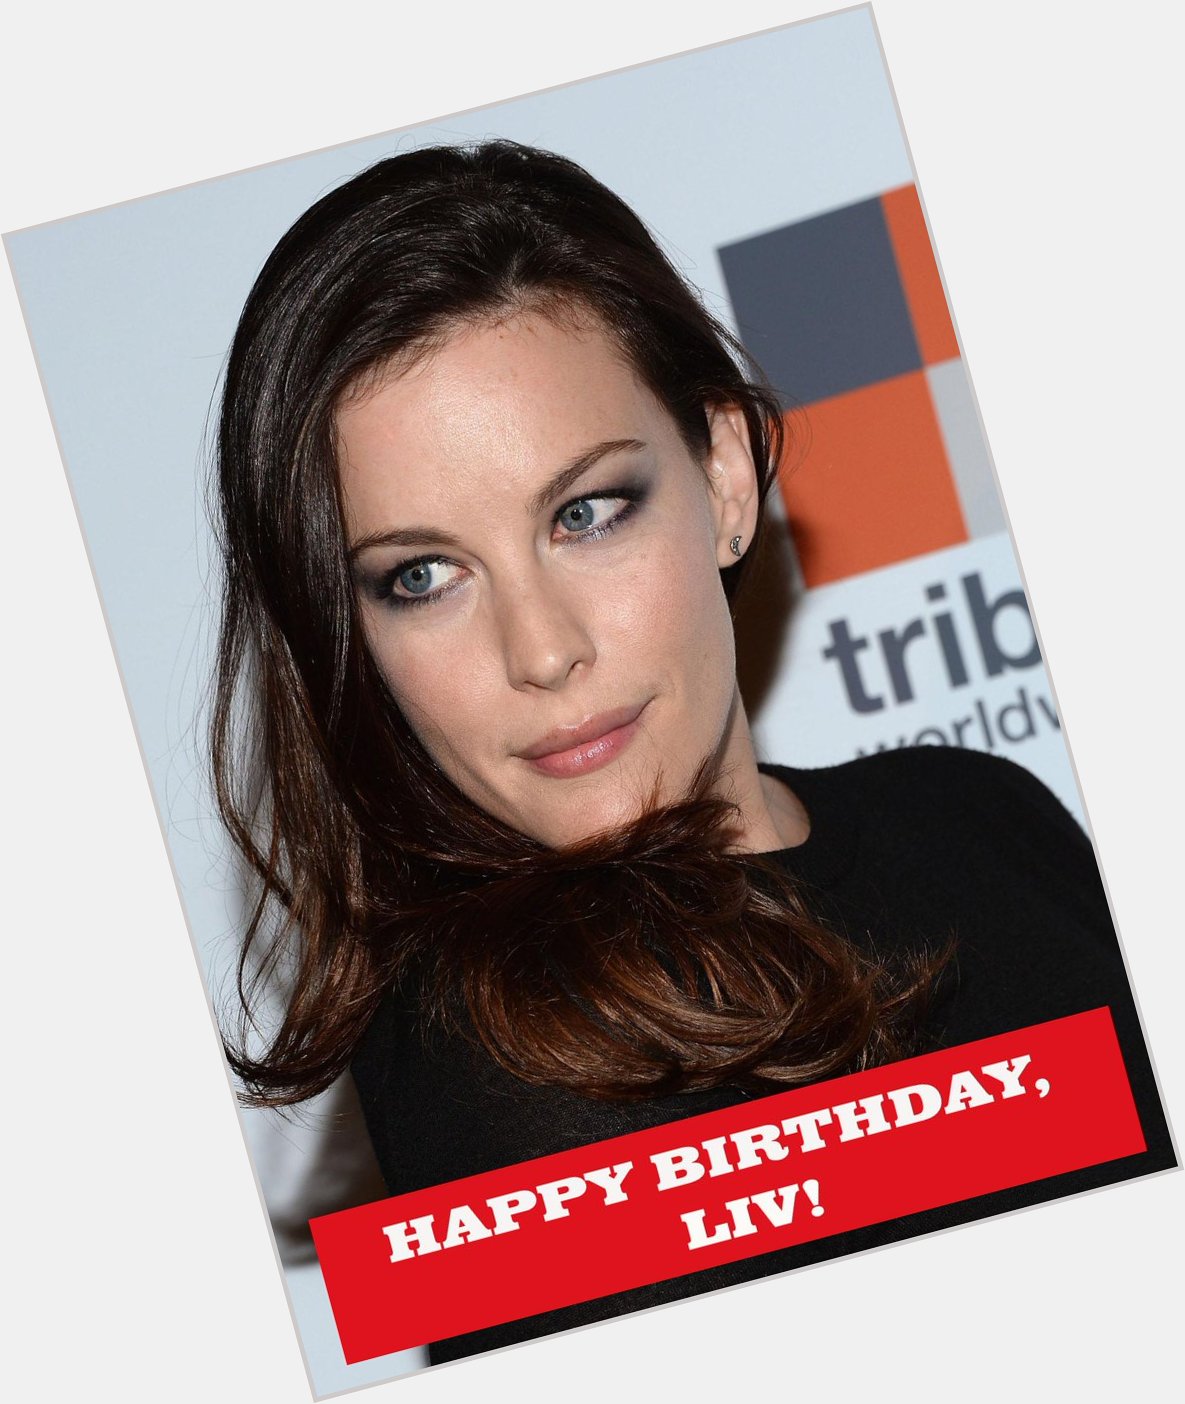 Happy Birthday to Liv Tyler. Steven Tyler gave us a great gift. 